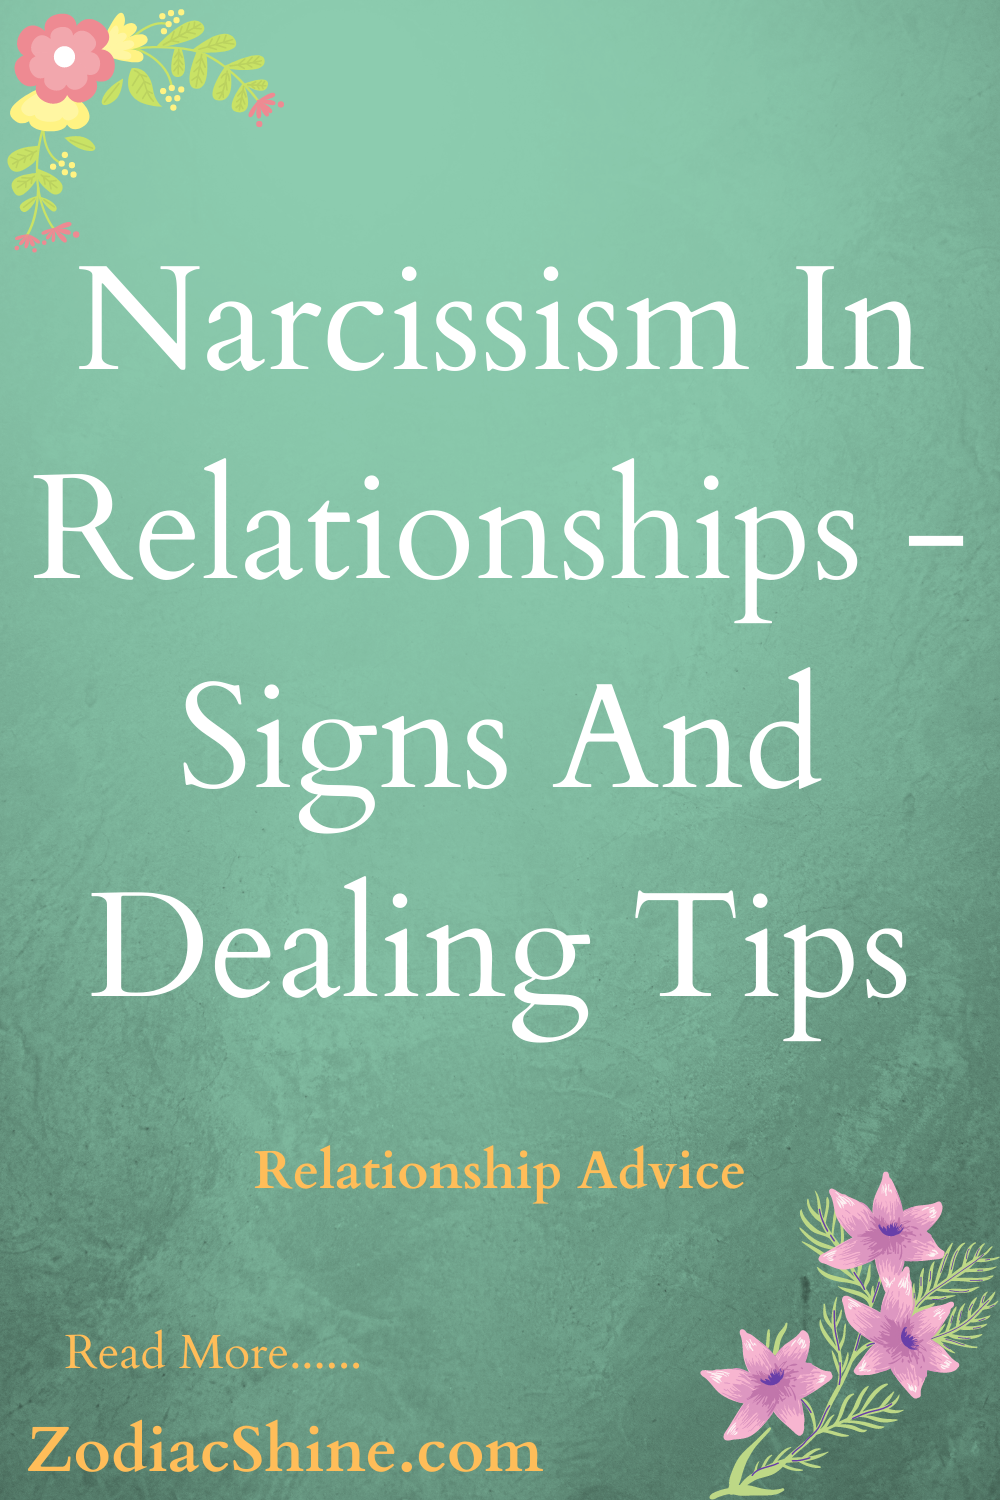 Narcissism In Relationships - Signs And Dealing Tips